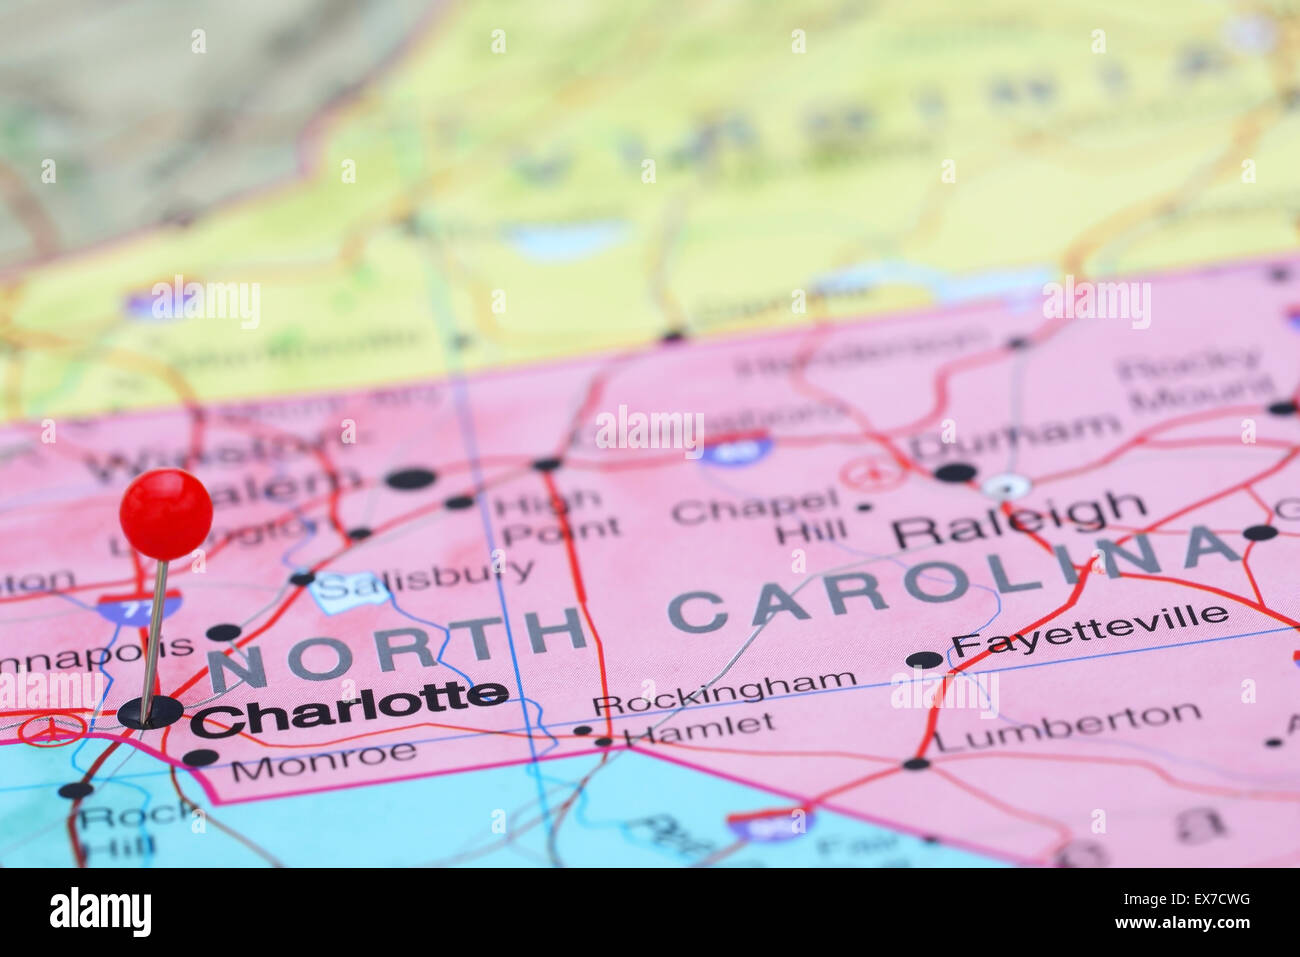 Google Map of the City of Charlotte, North Carolina, USA - Nations Online  Project